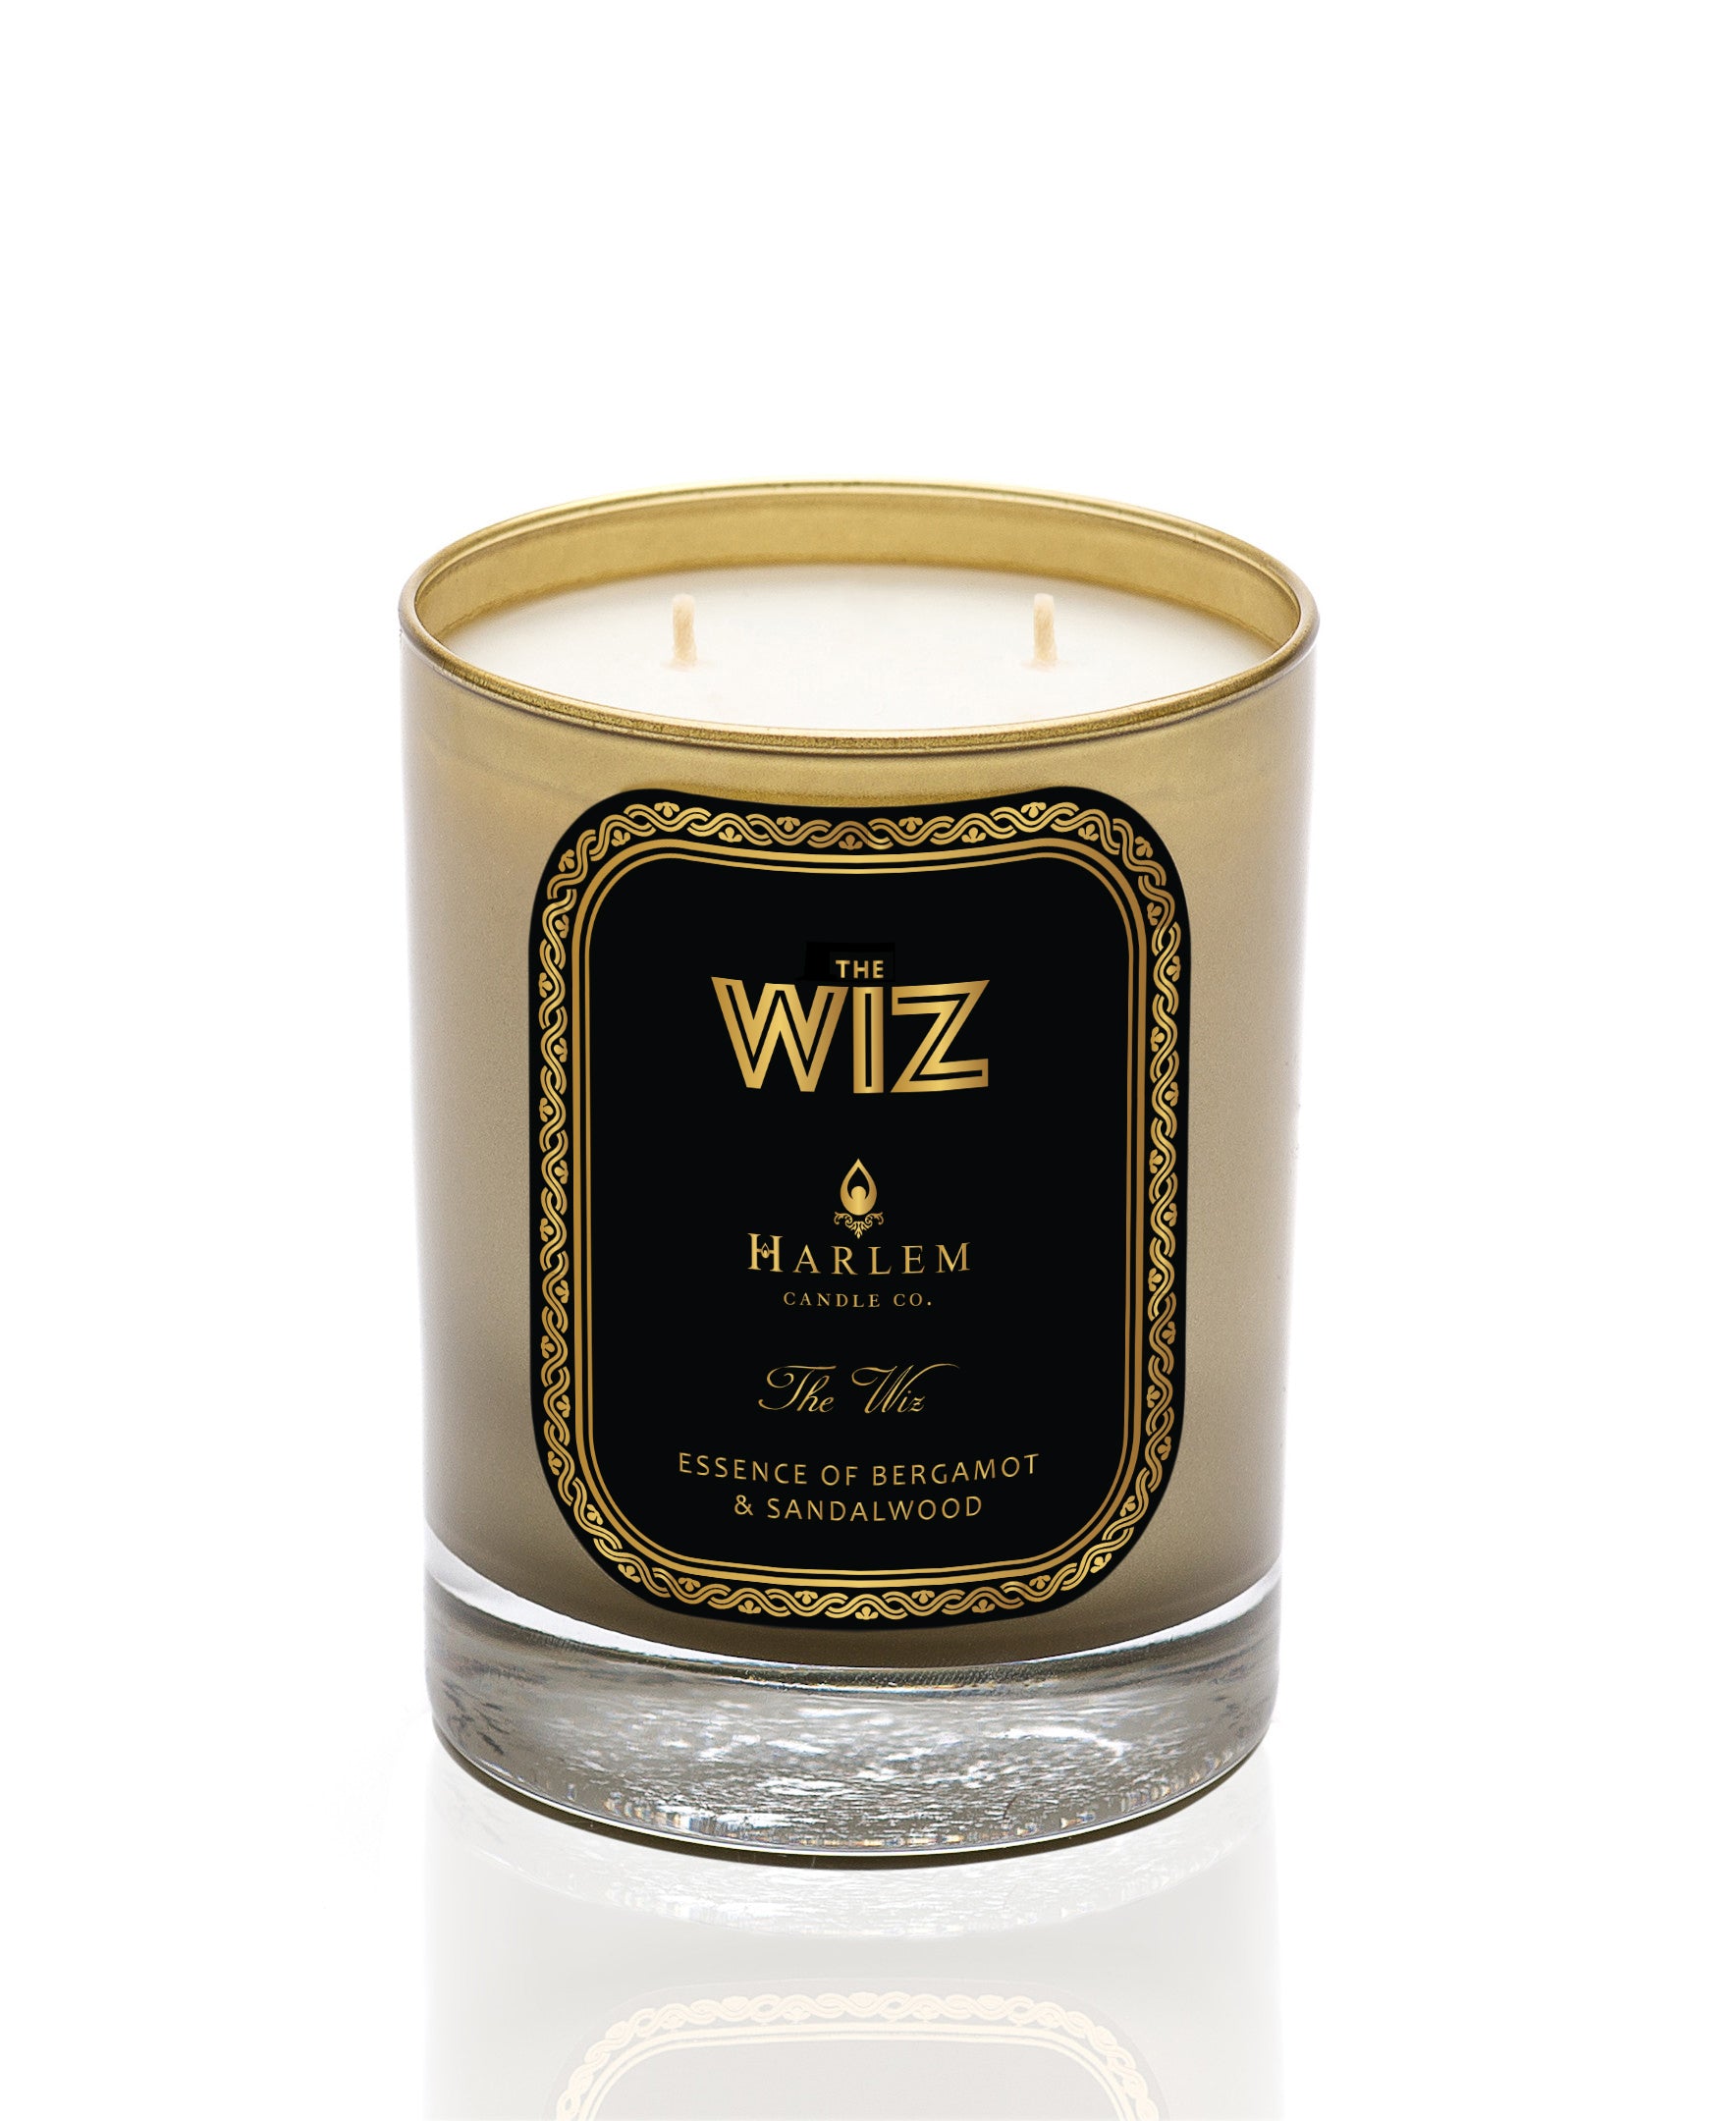 This is an image of the wiz candle in a gold glass with a black and gold label